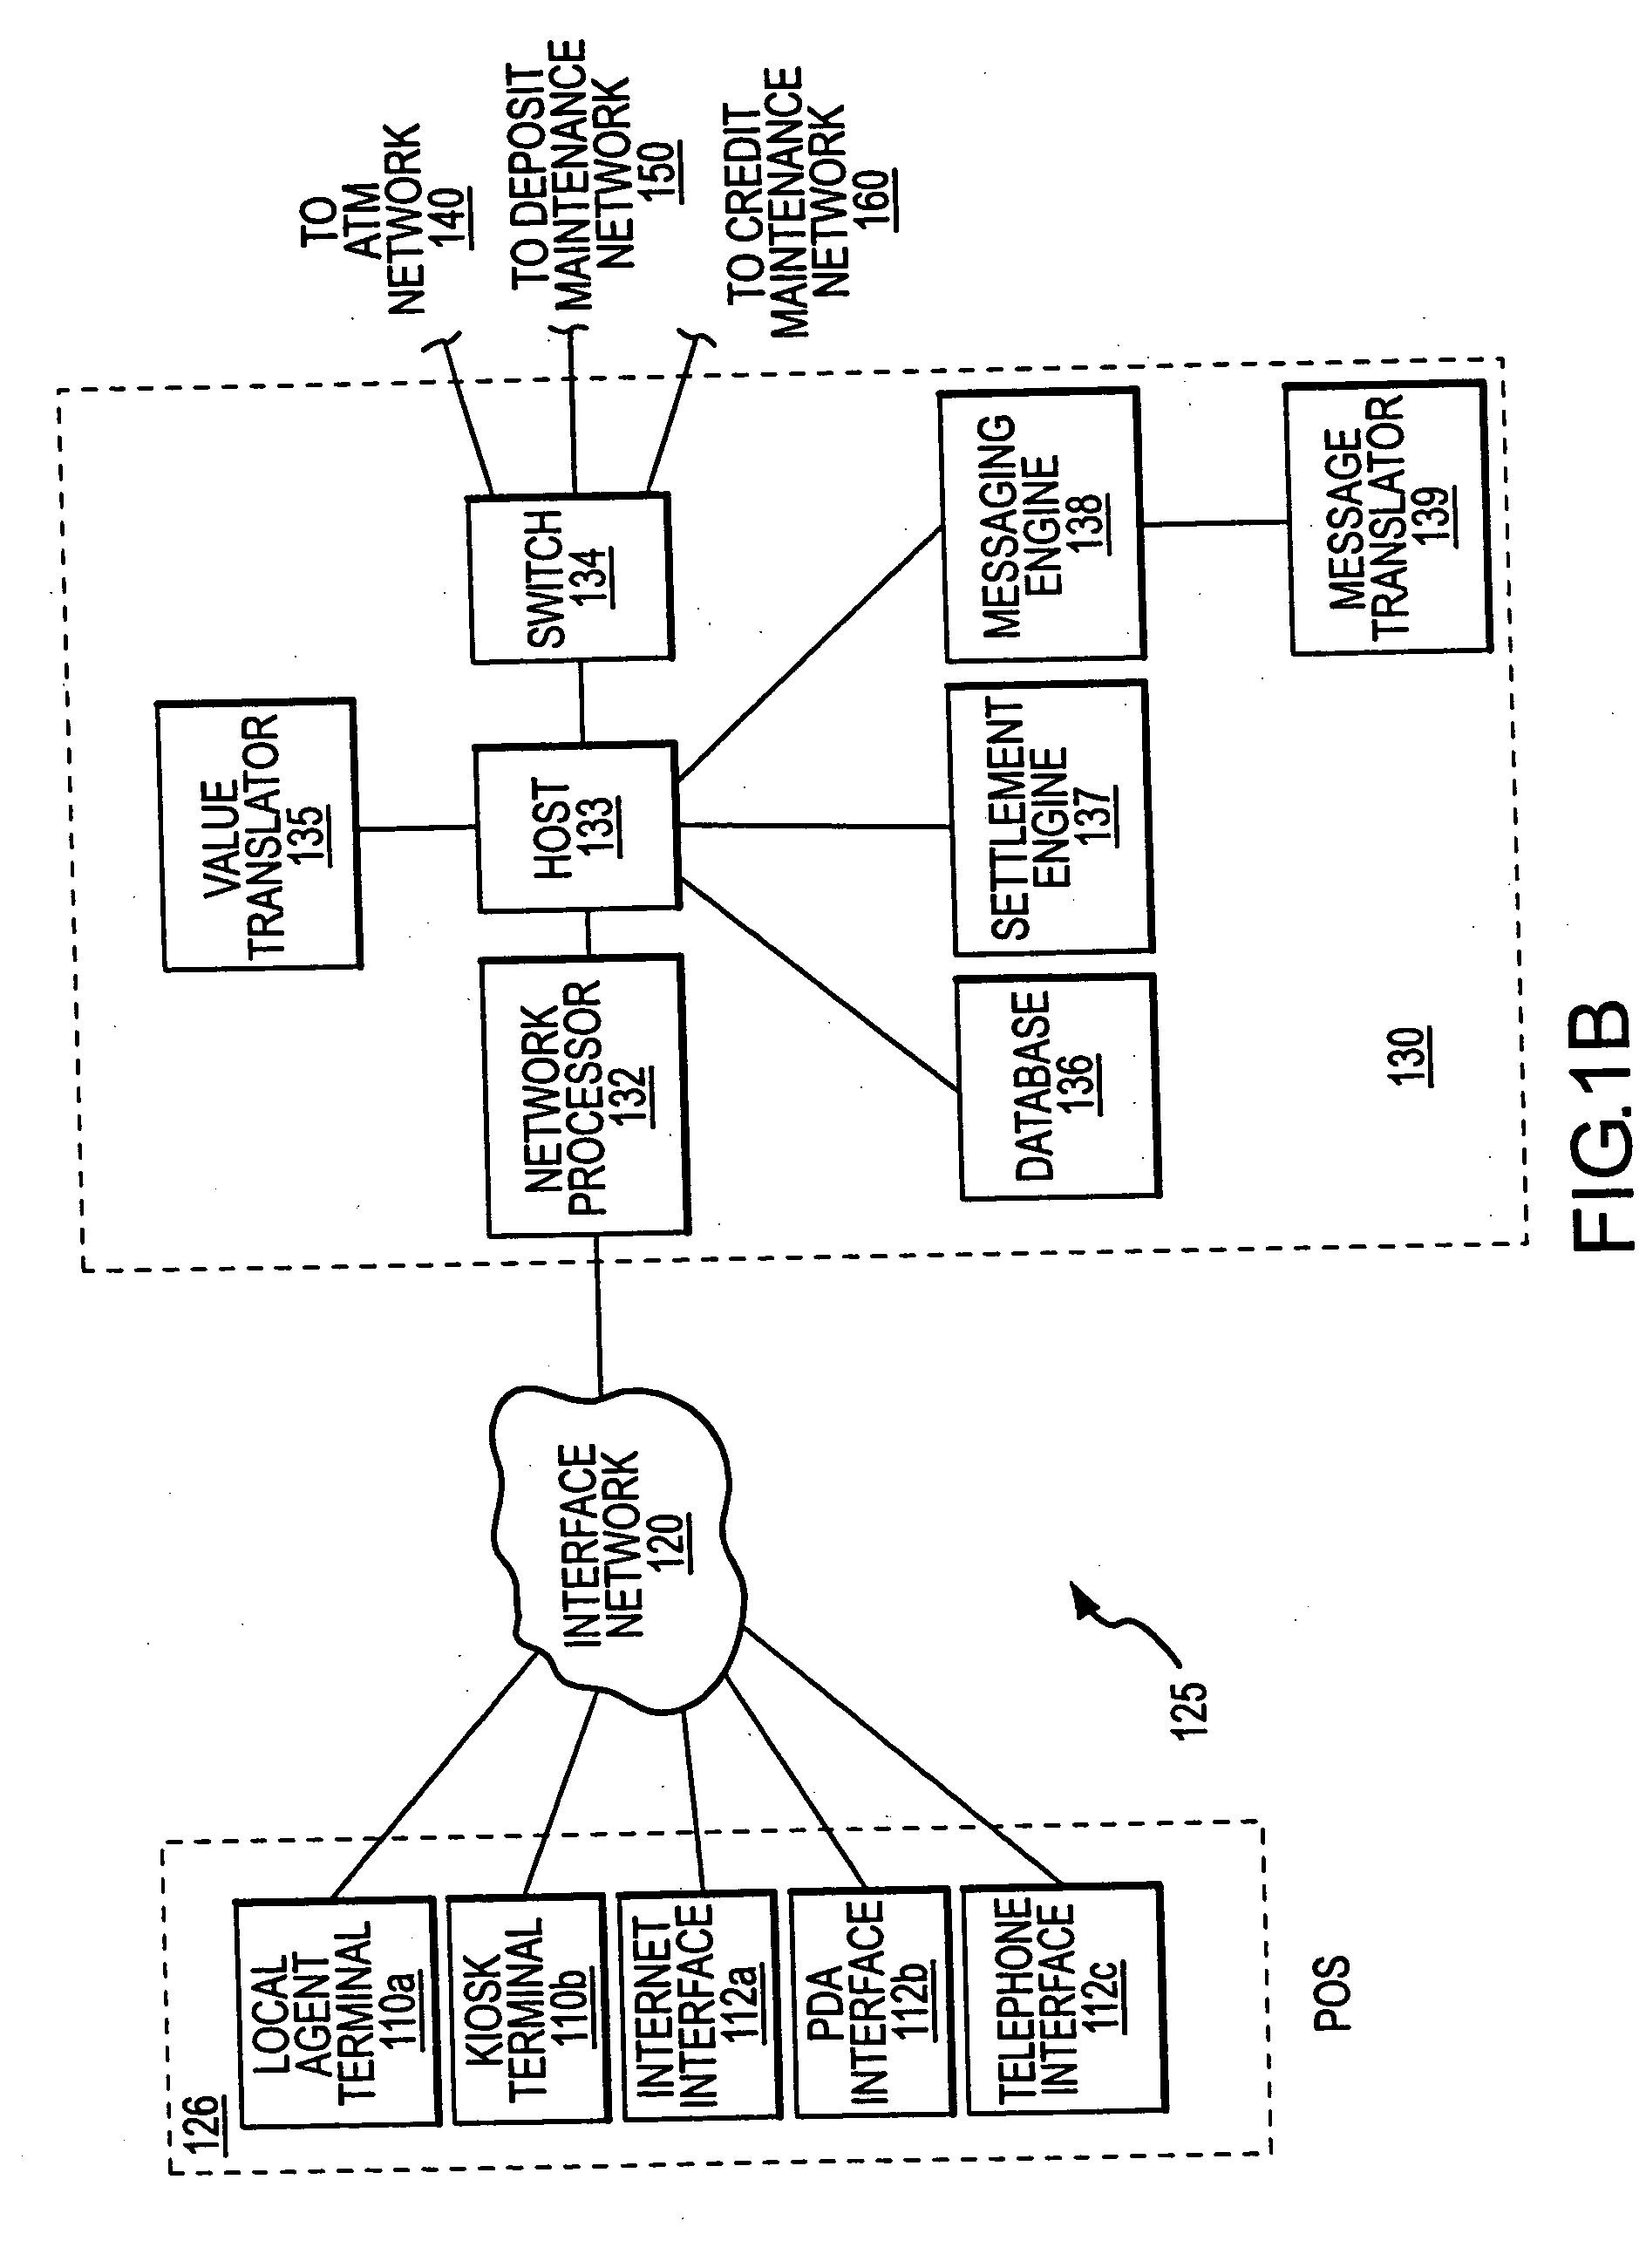 Systems and methods of introducing and receiving information across a computer network